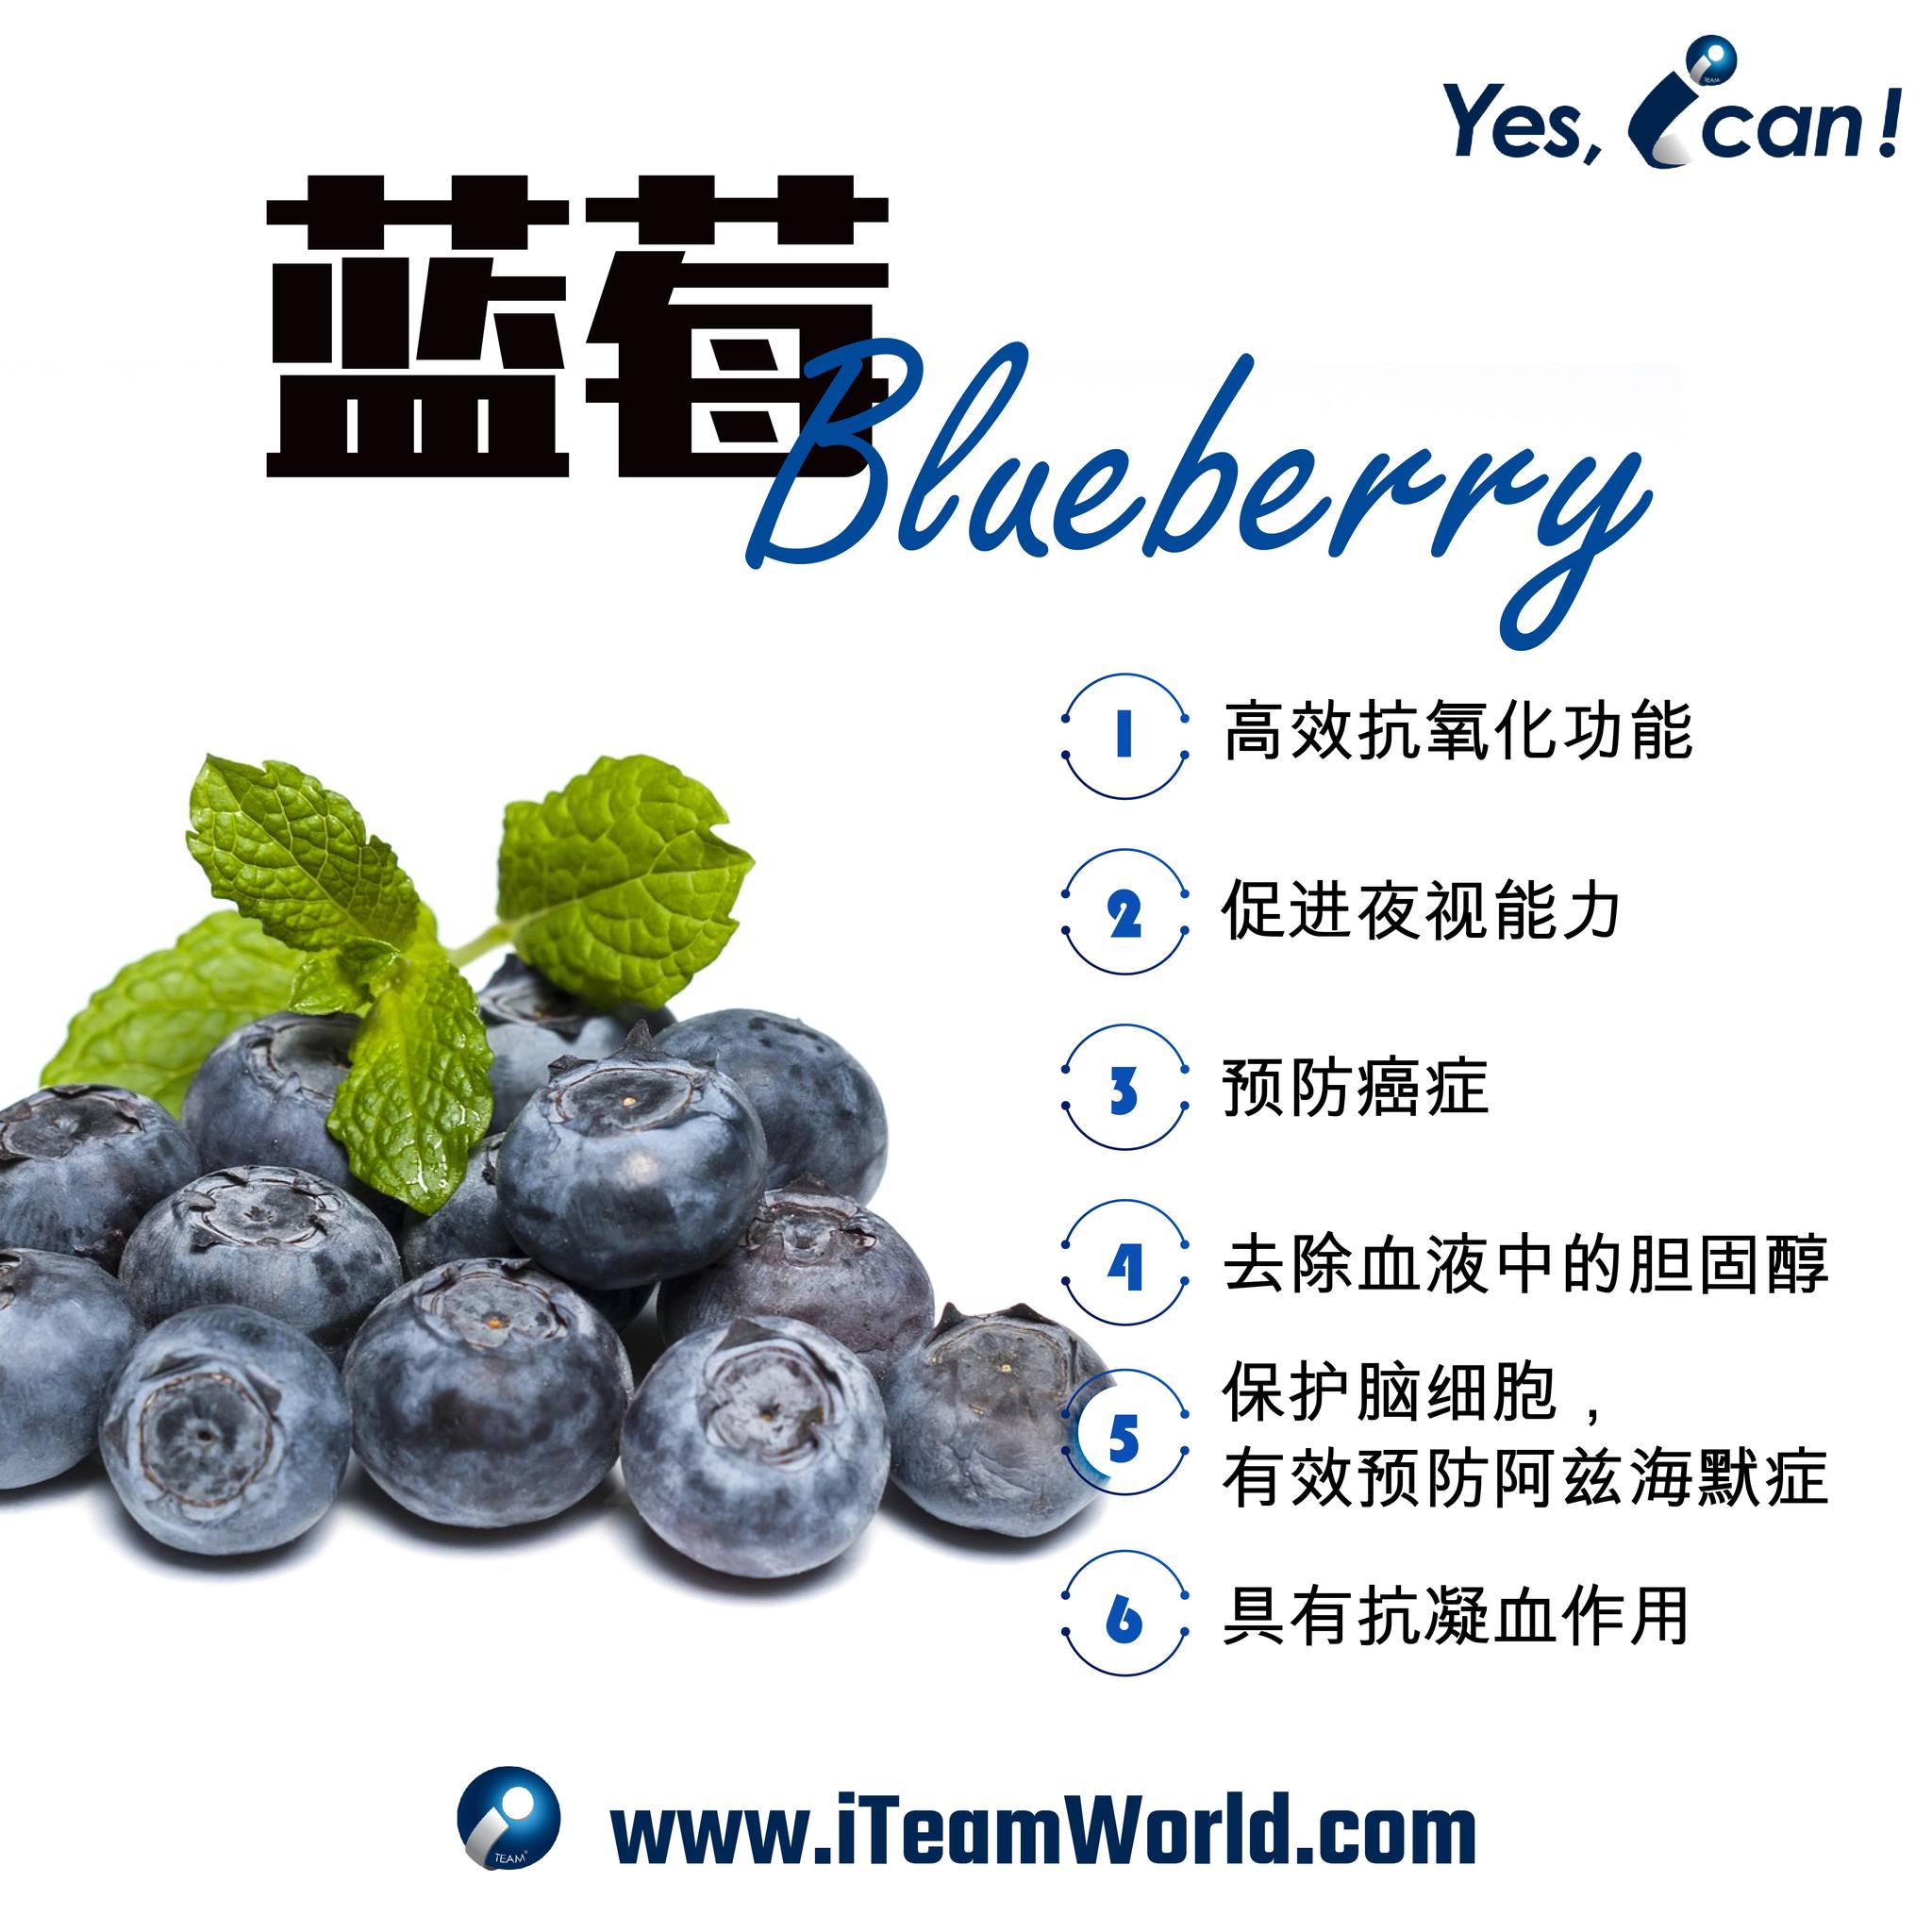 Plant food - Blueberry